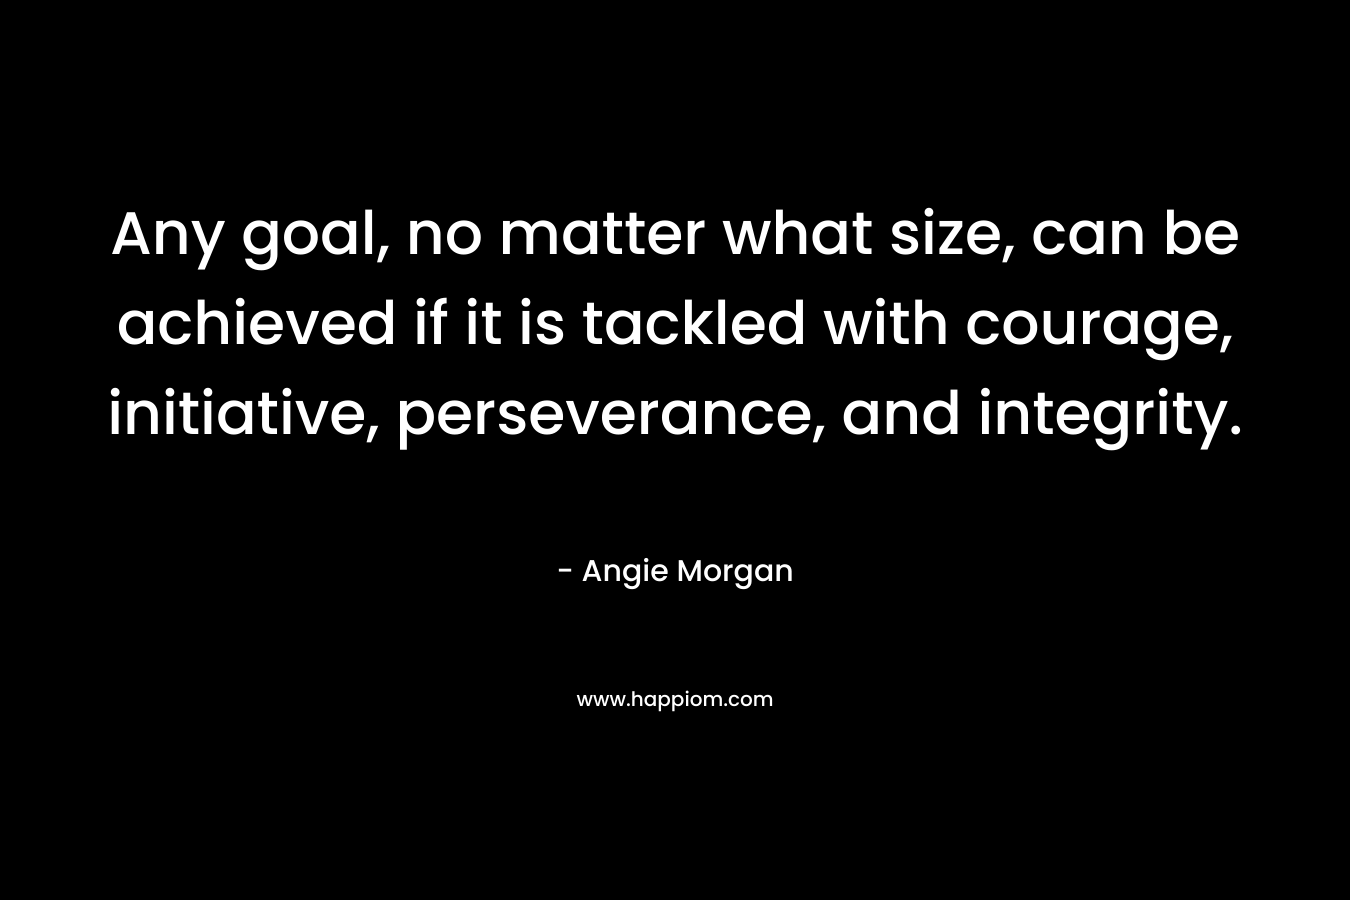 Any goal, no matter what size, can be achieved if it is tackled with courage, initiative, perseverance, and integrity.